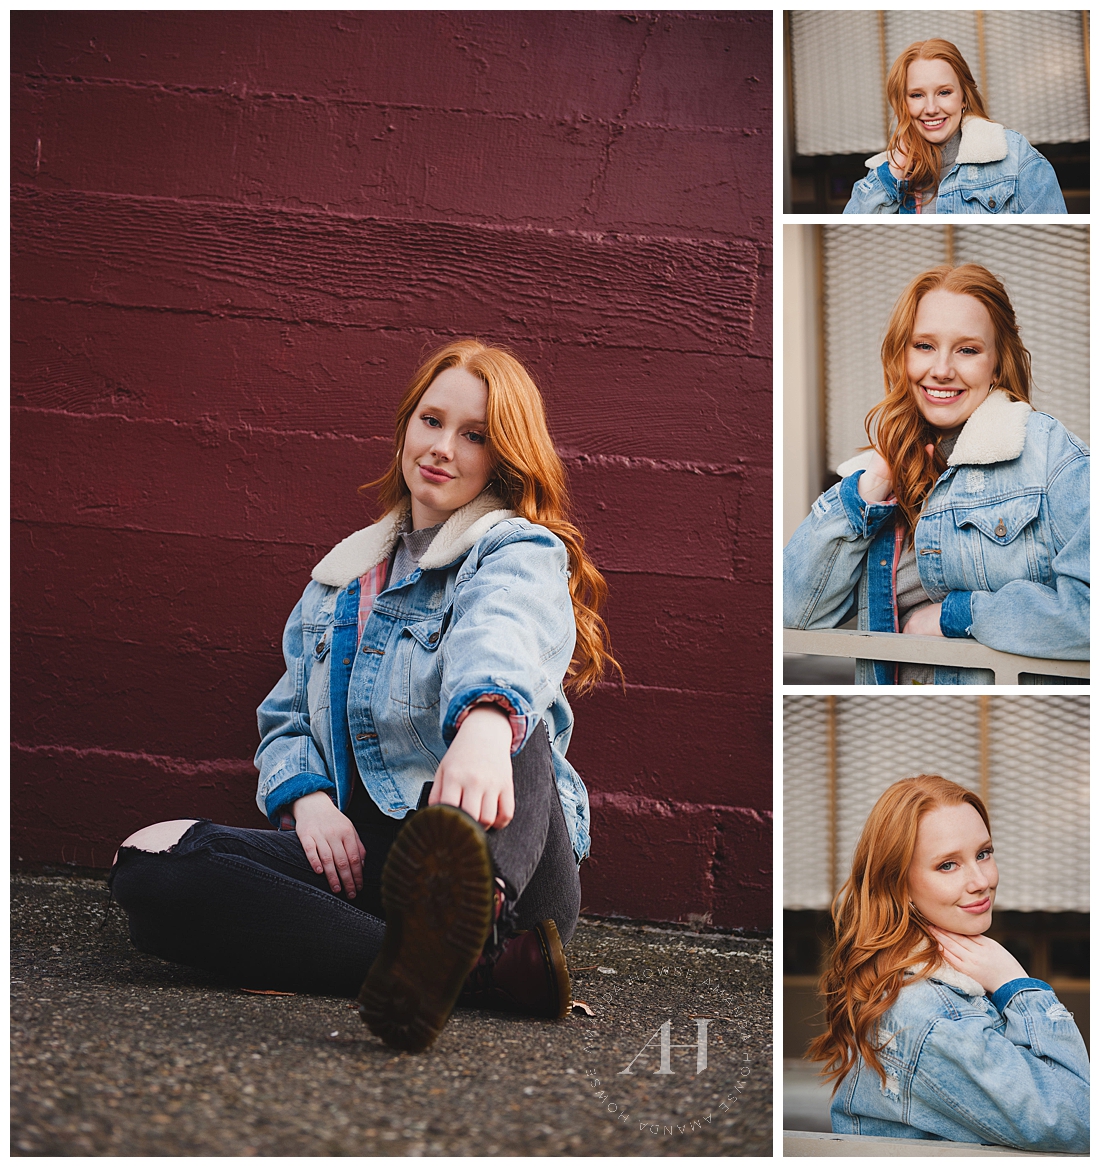 Casual senior portraits in Tacoma with beautiful redhead in sherpa jean jacket photographed by Tacoma senior portrait photographer Amanda Howse